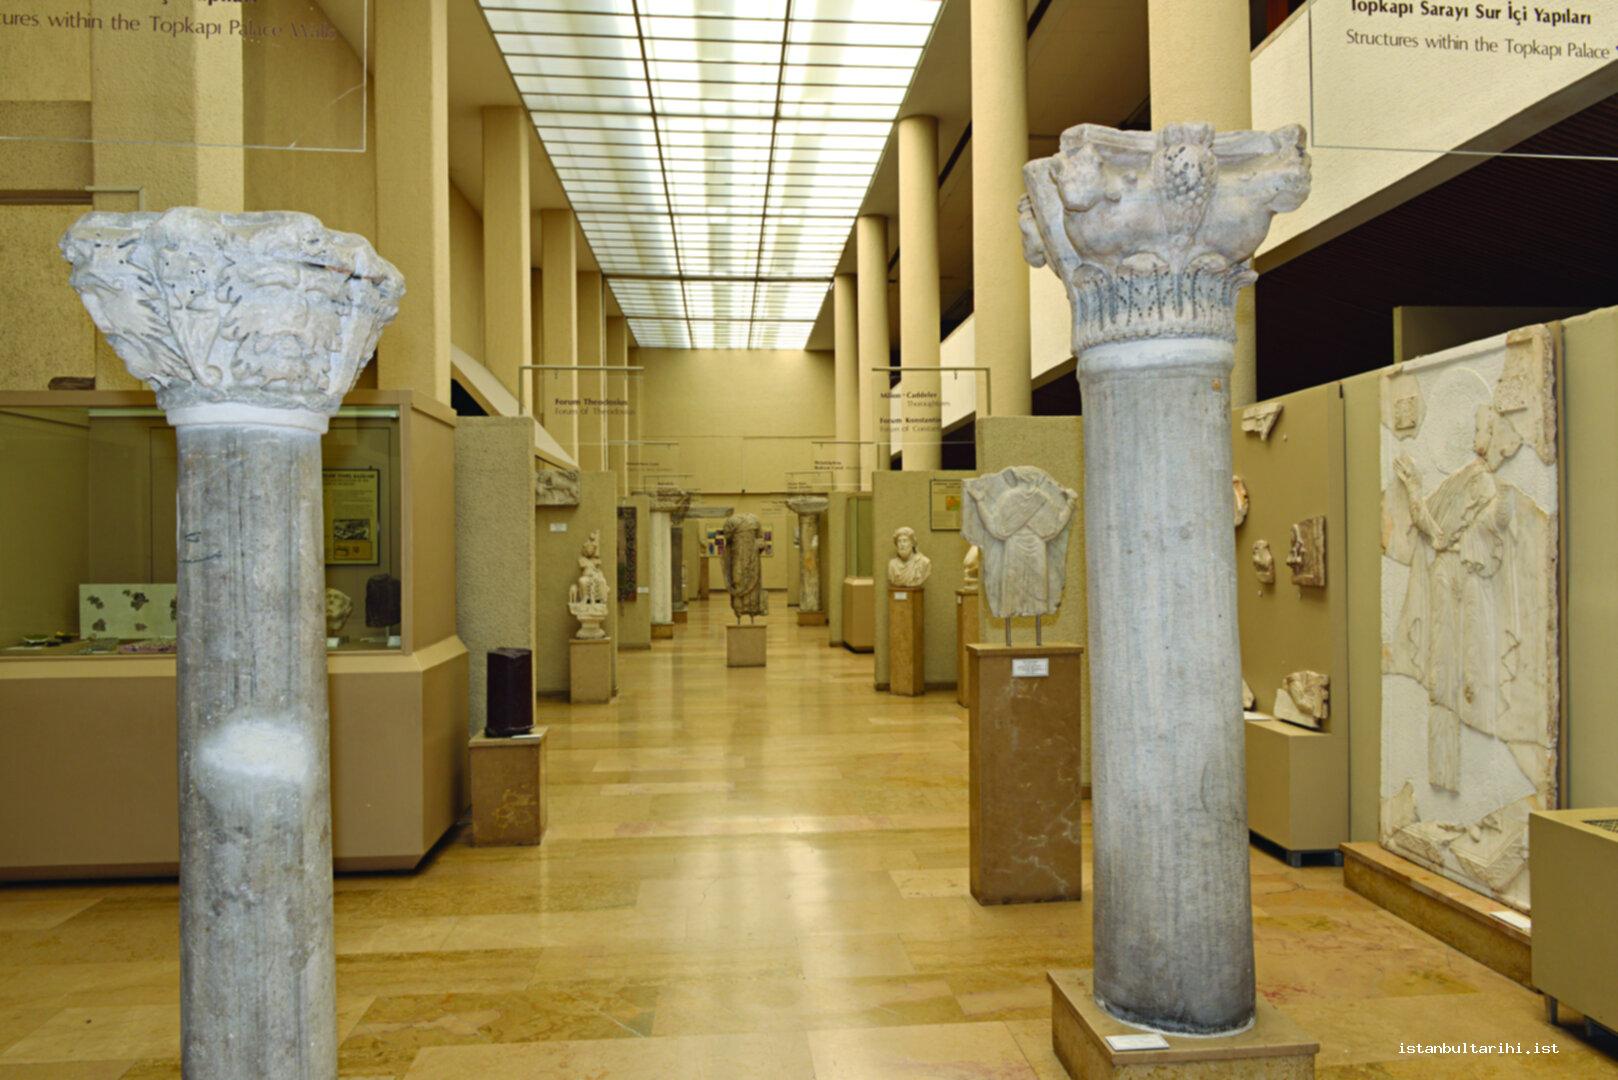 3- Istanbul Archeology Museum where some artifacts from the pre-Ottoman period are exhibited